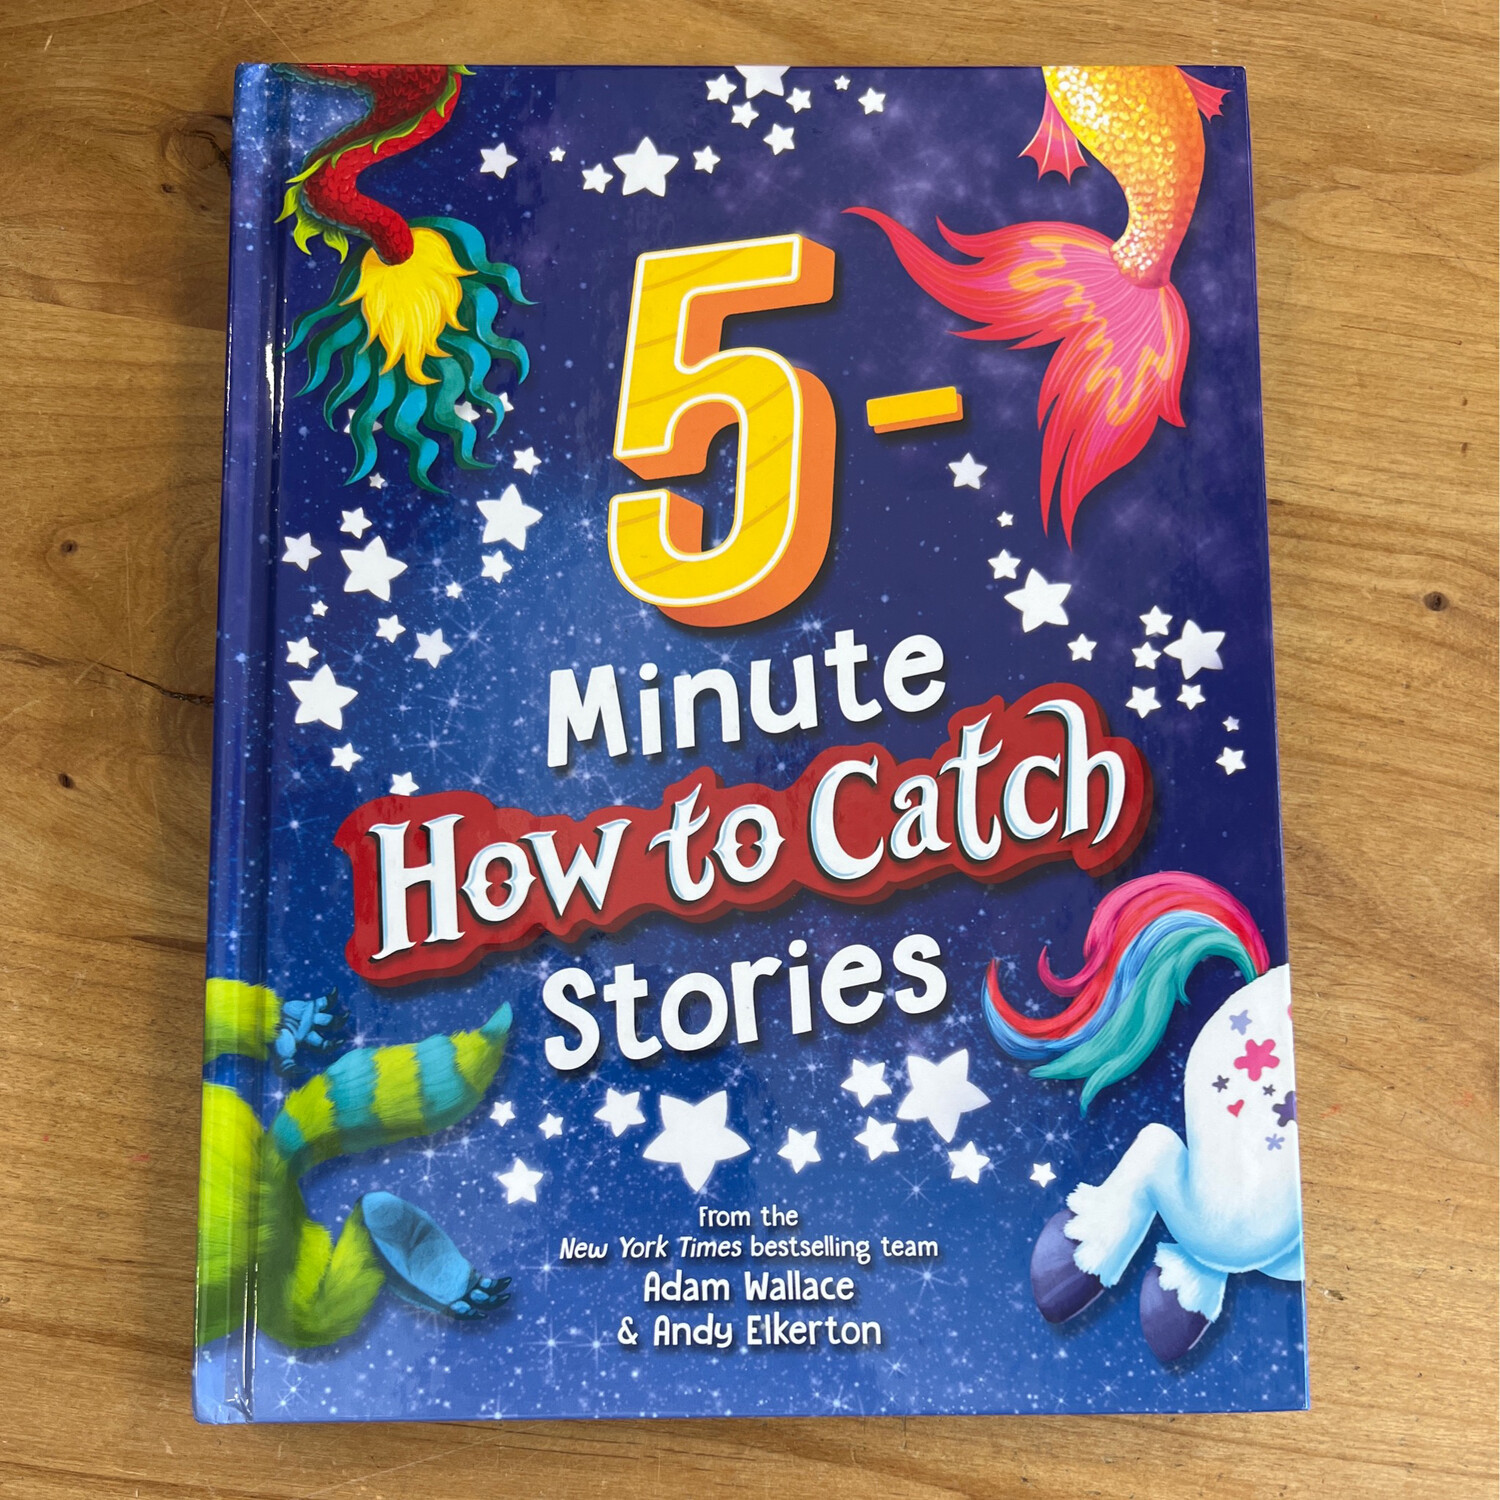 5 minute How to Catch Stories